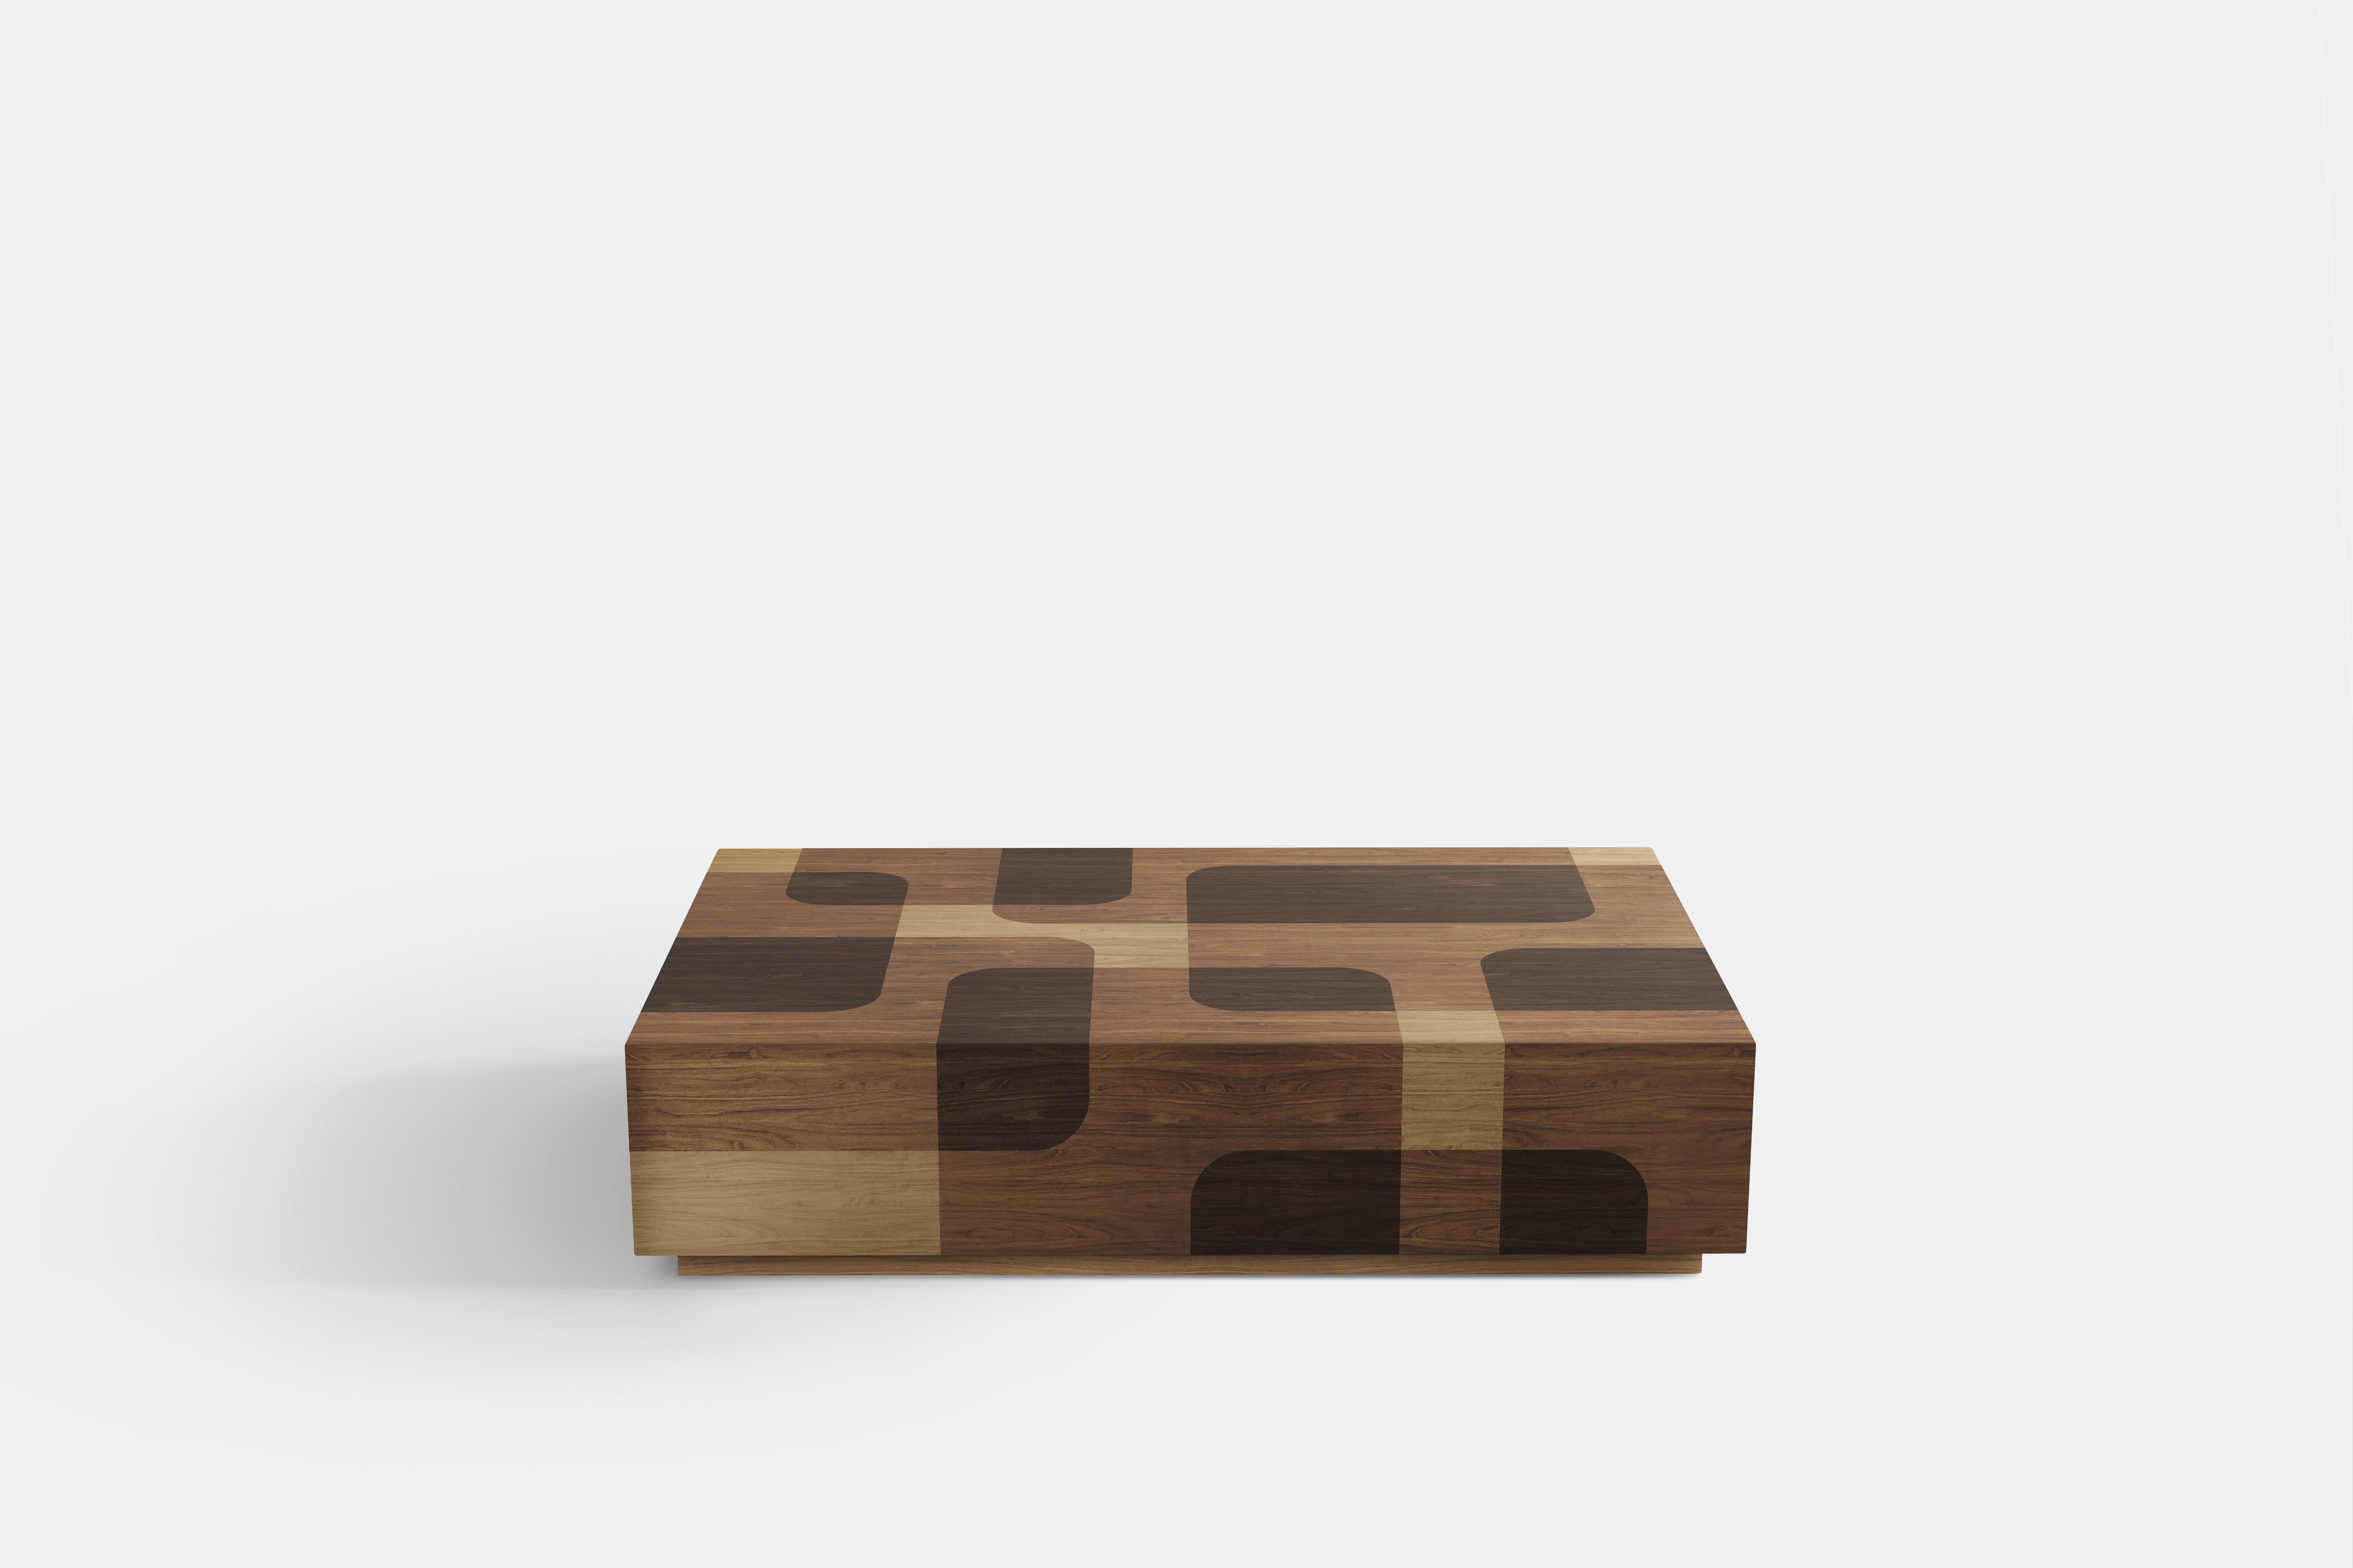 2 Bodega Nightstands and 1 Coffee Table in Warm Wood Marquetry by Joel Escalona (Sperrholz) im Angebot